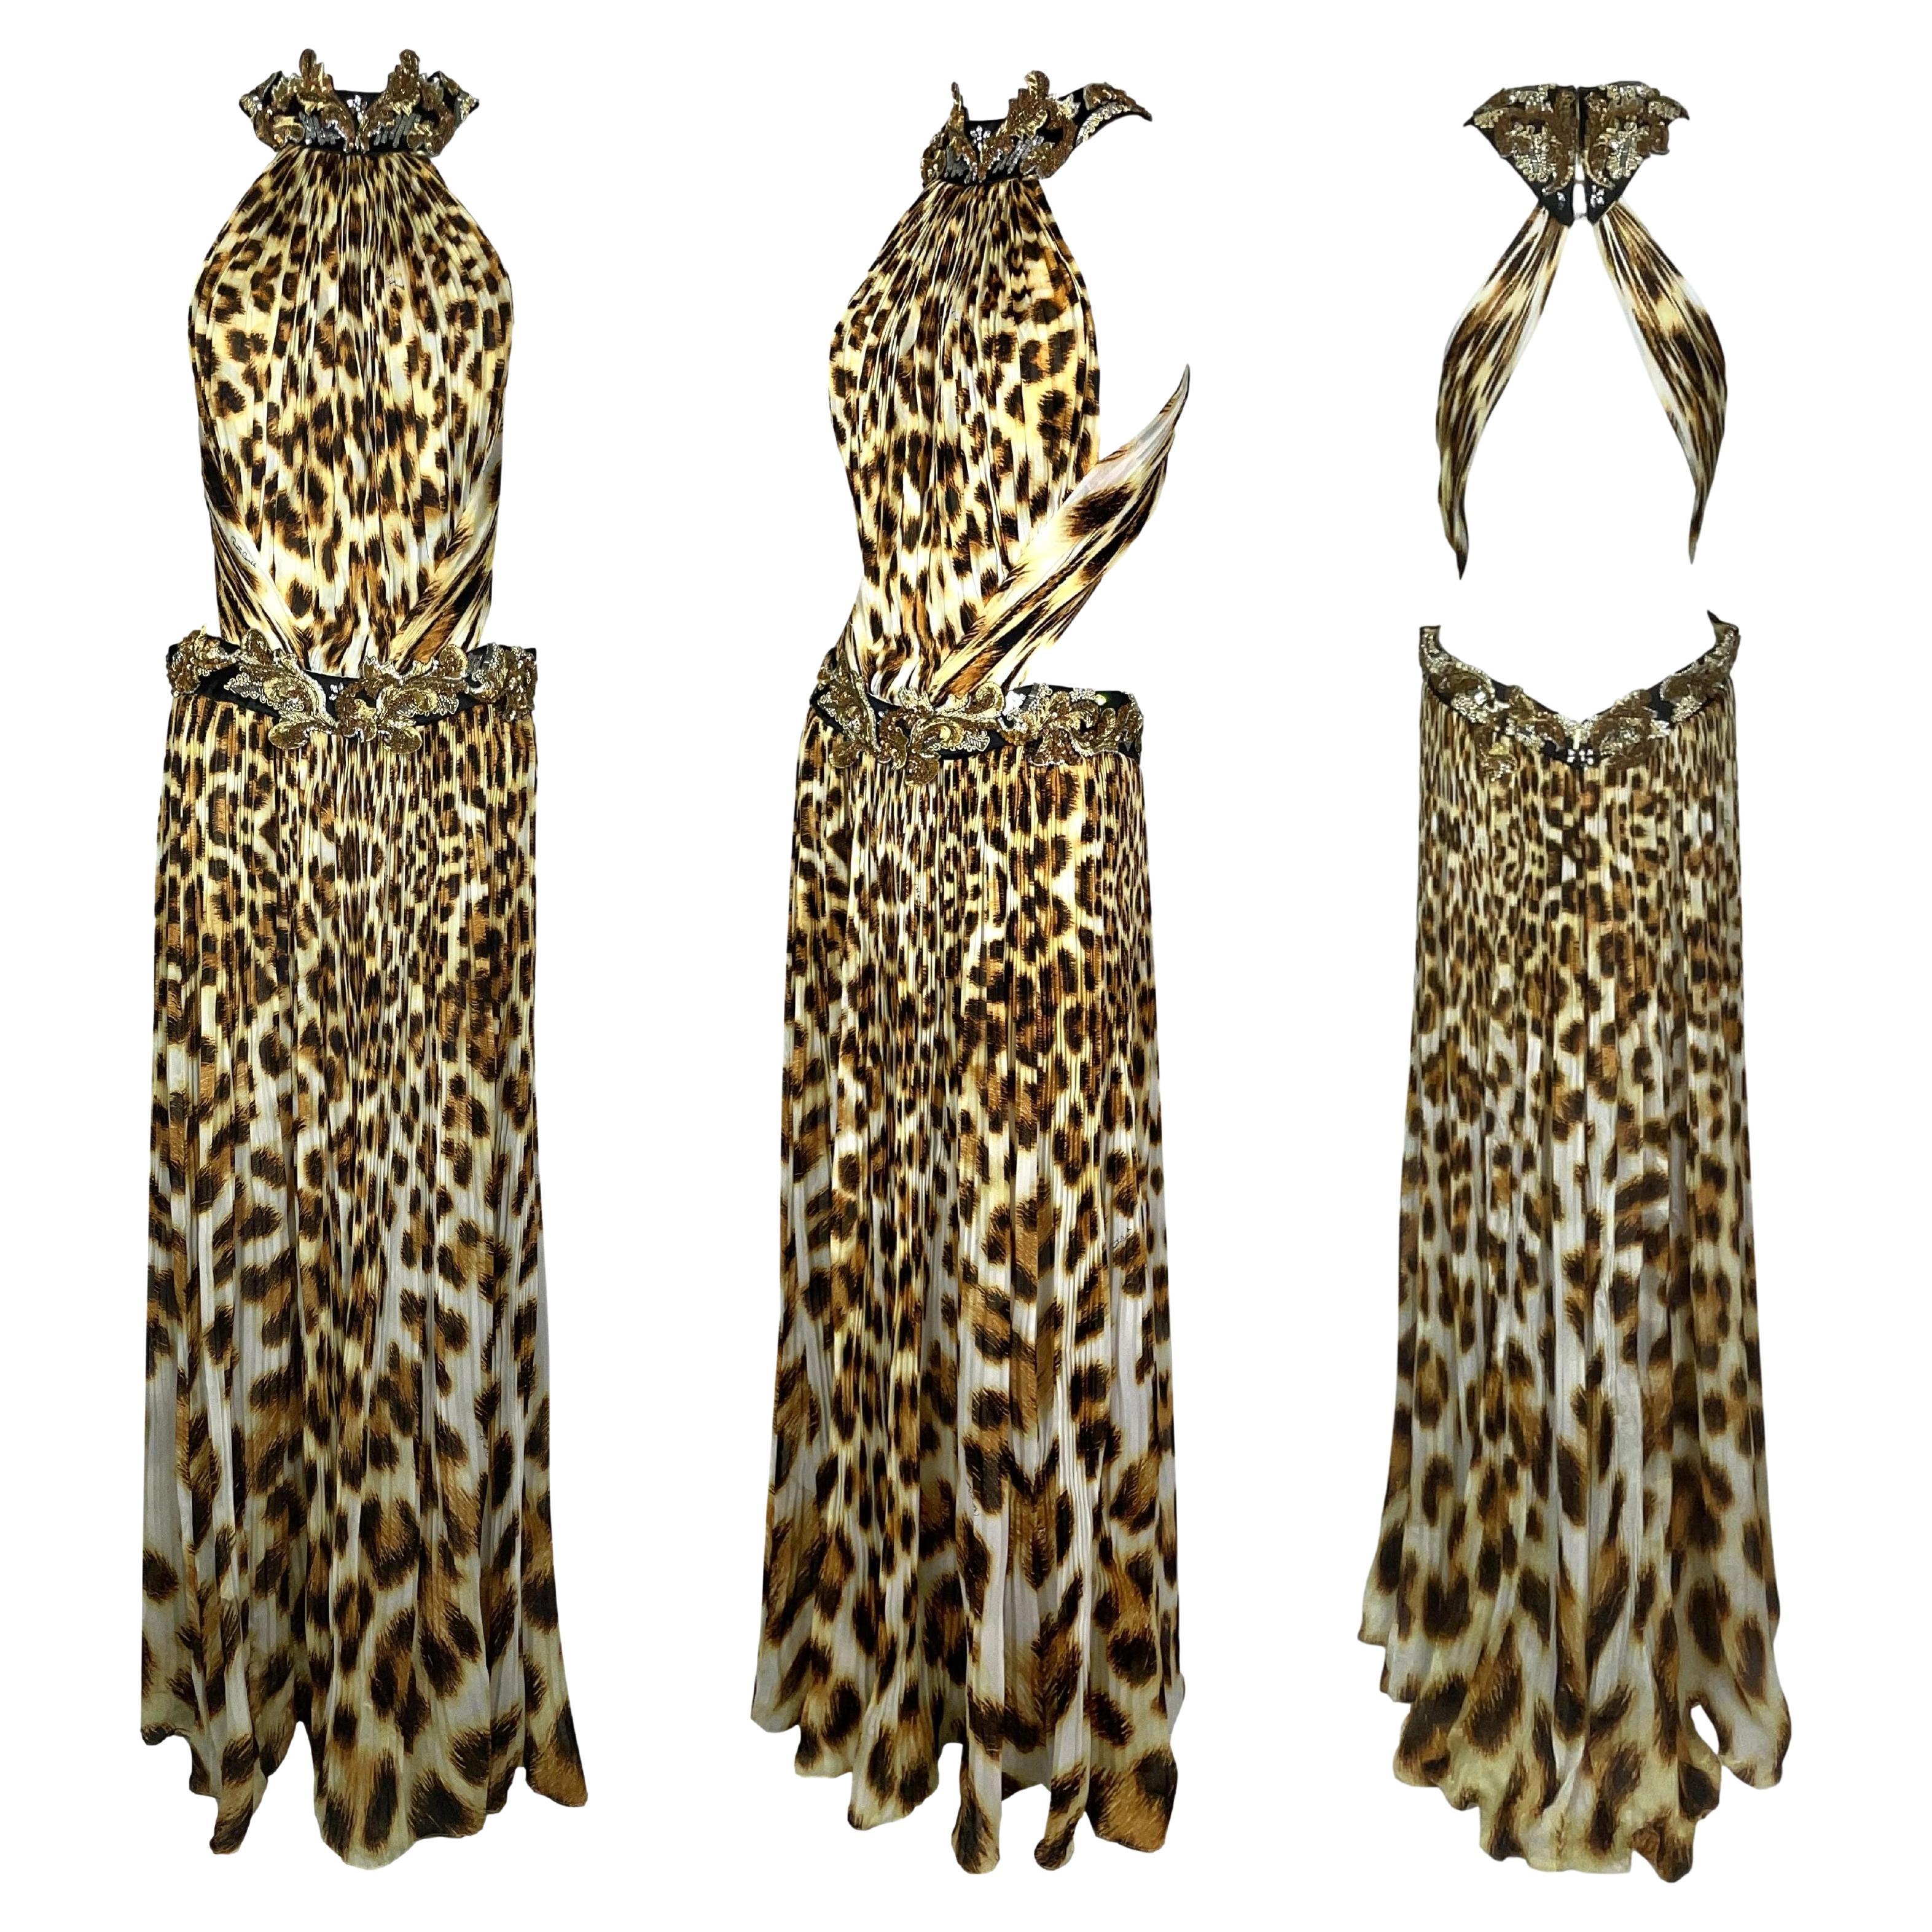 S/S 2007 Roberto Cavalli Runway Backless Embellished Silk Leopard Gown Dress